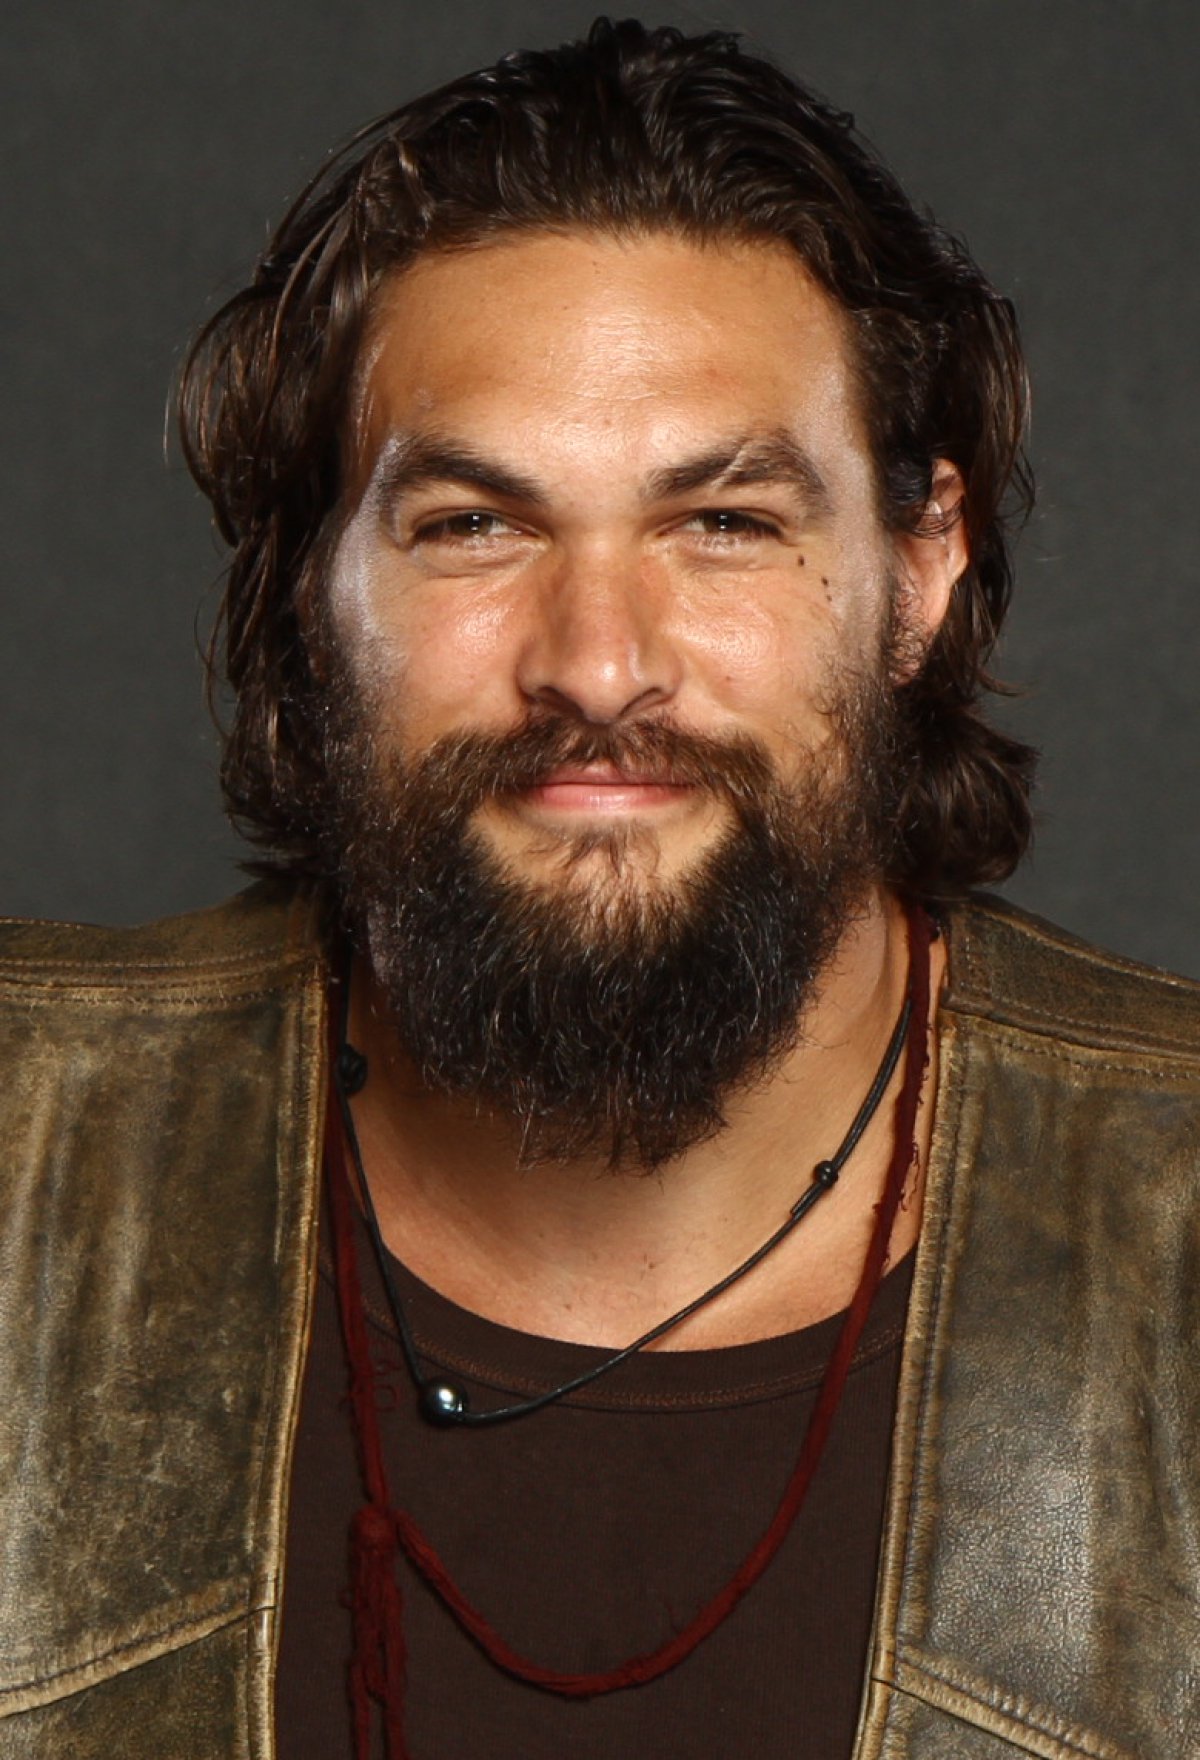 Jason Momoa plays 18th century outlaw in trailer for Netflix's new 'Frontier' series ...